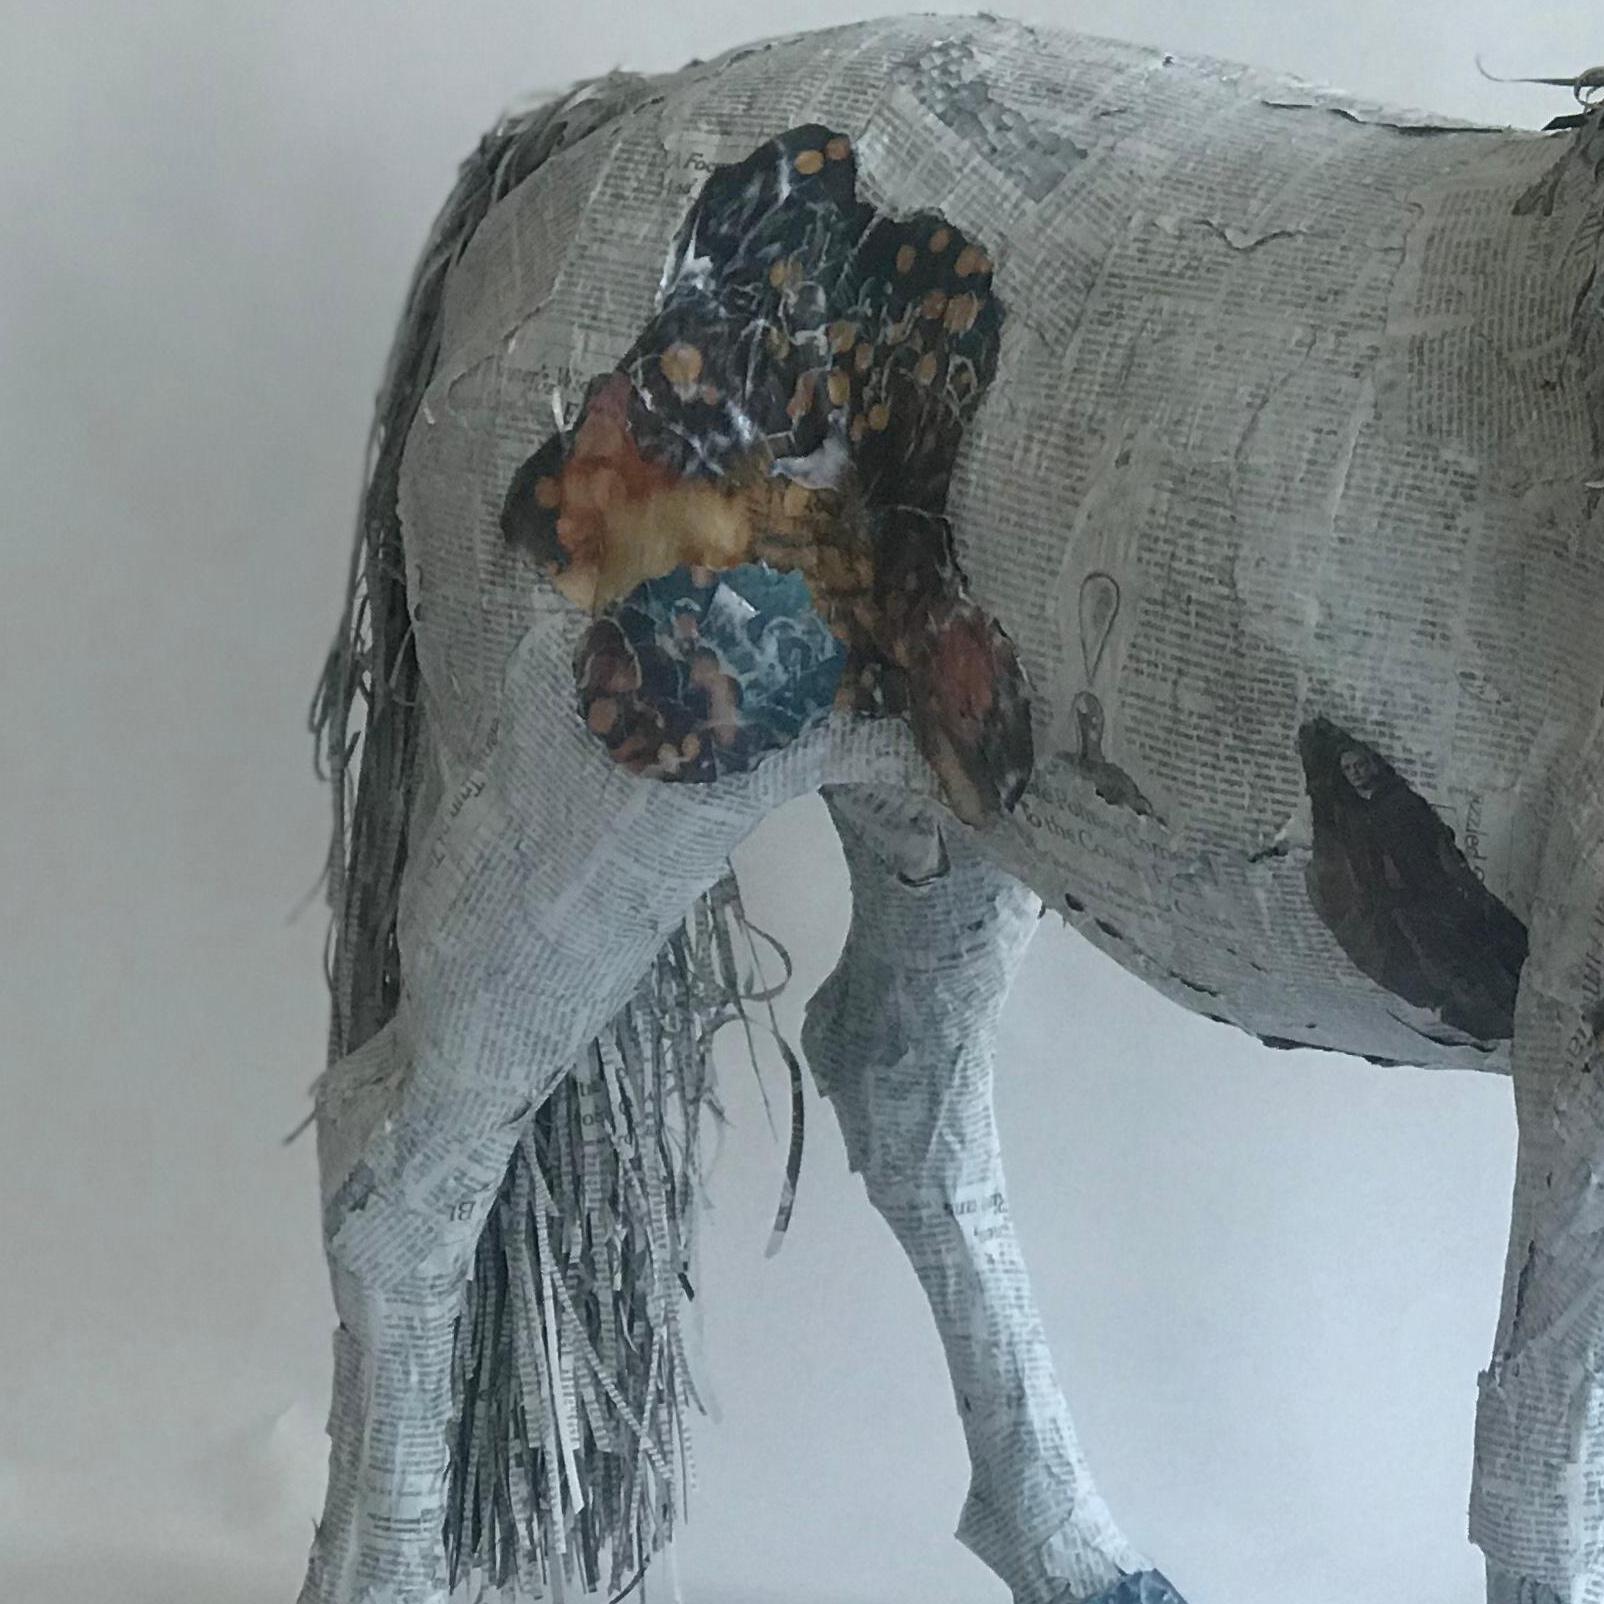 Will Kurtz uses newspaper to construct his sculptural homage to Einstein, the world's smallest horse. The shredded paper of his tail and mane flutter gently, filling the little horse with warmth and life. The use of newsprint cleverly refers back to